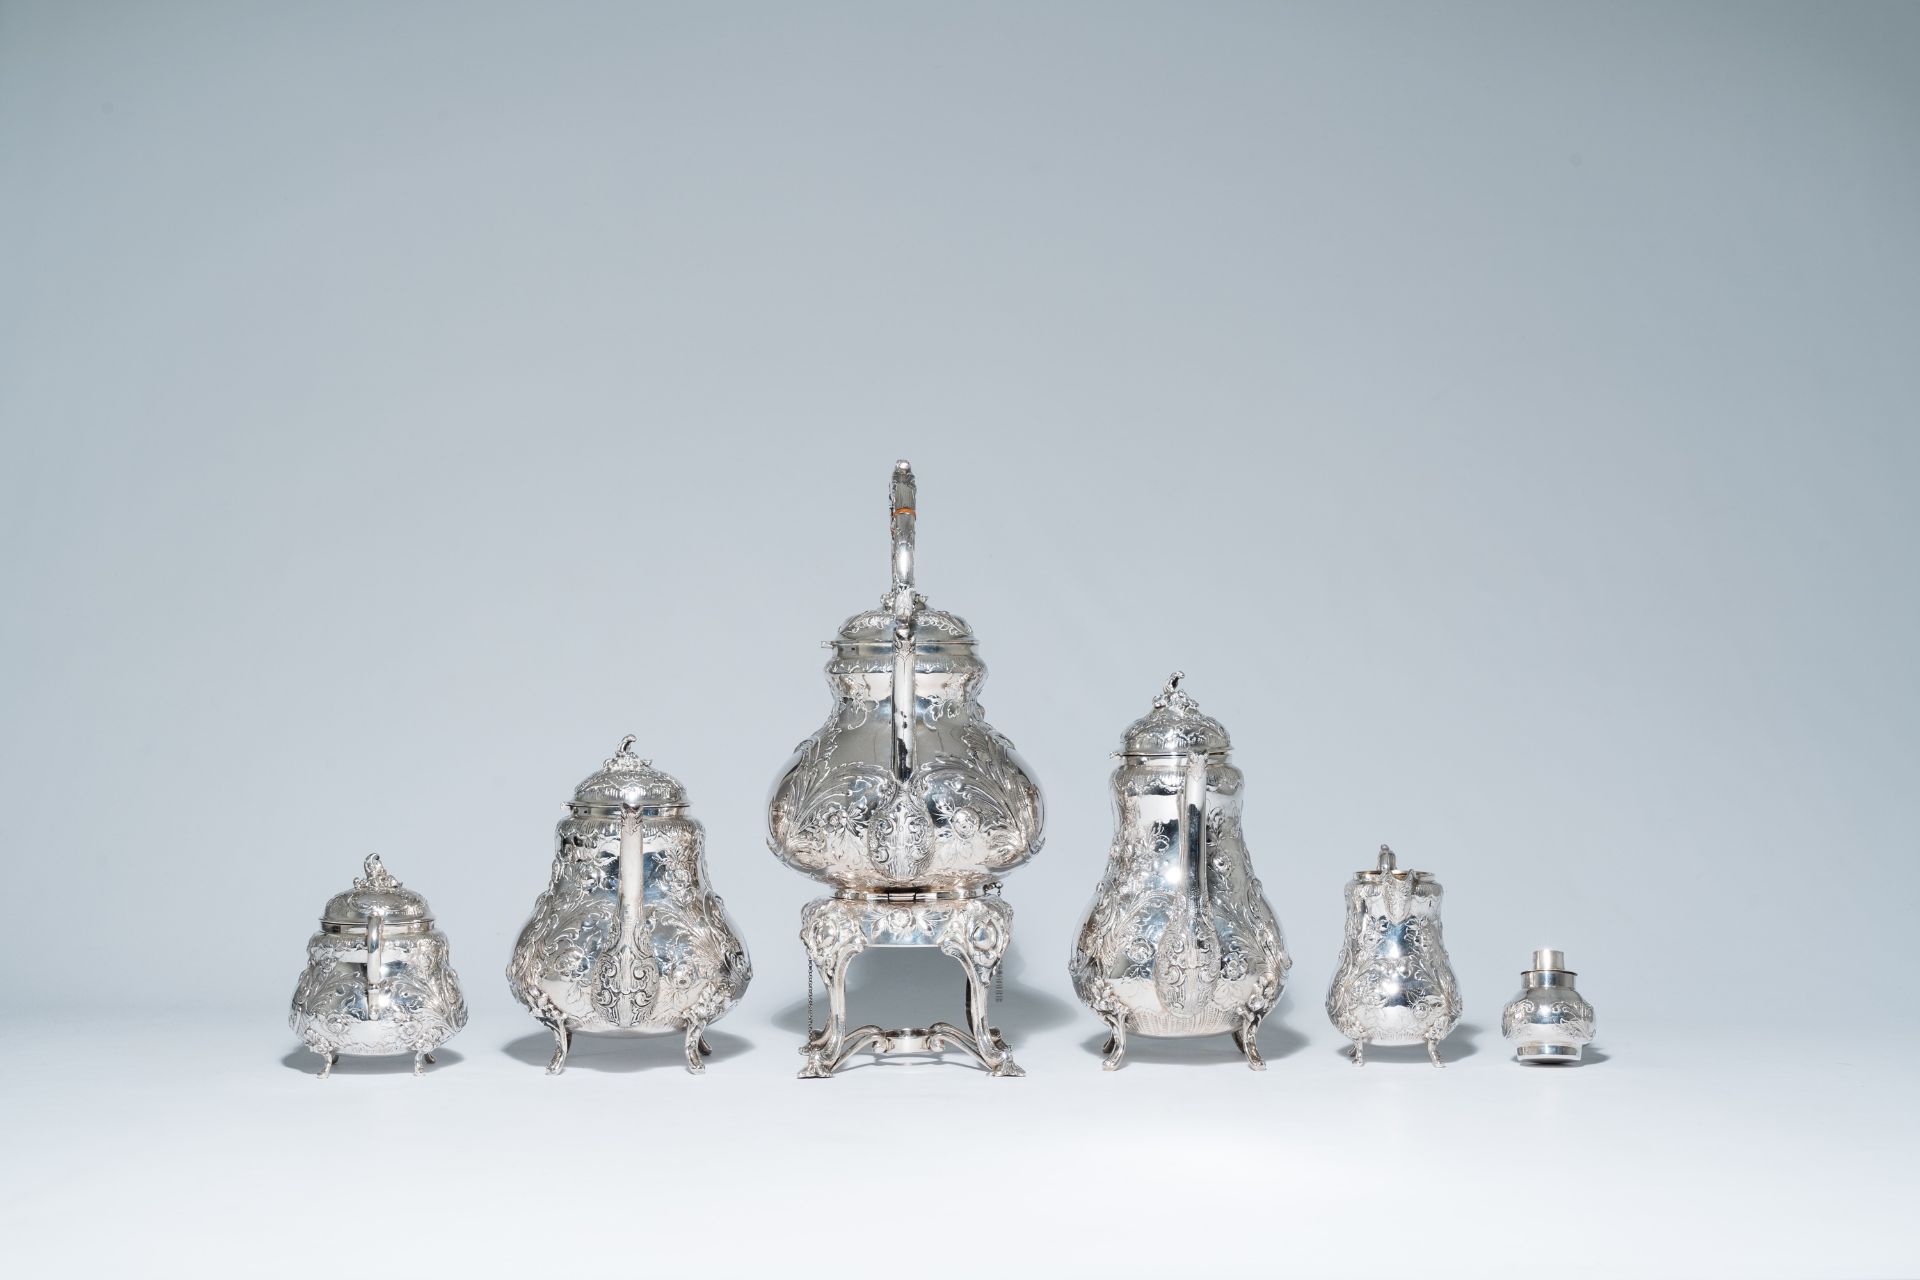 A five-piece German Rococo revival silver coffee and tea set with floral relief design, 800/000, mak - Image 4 of 20